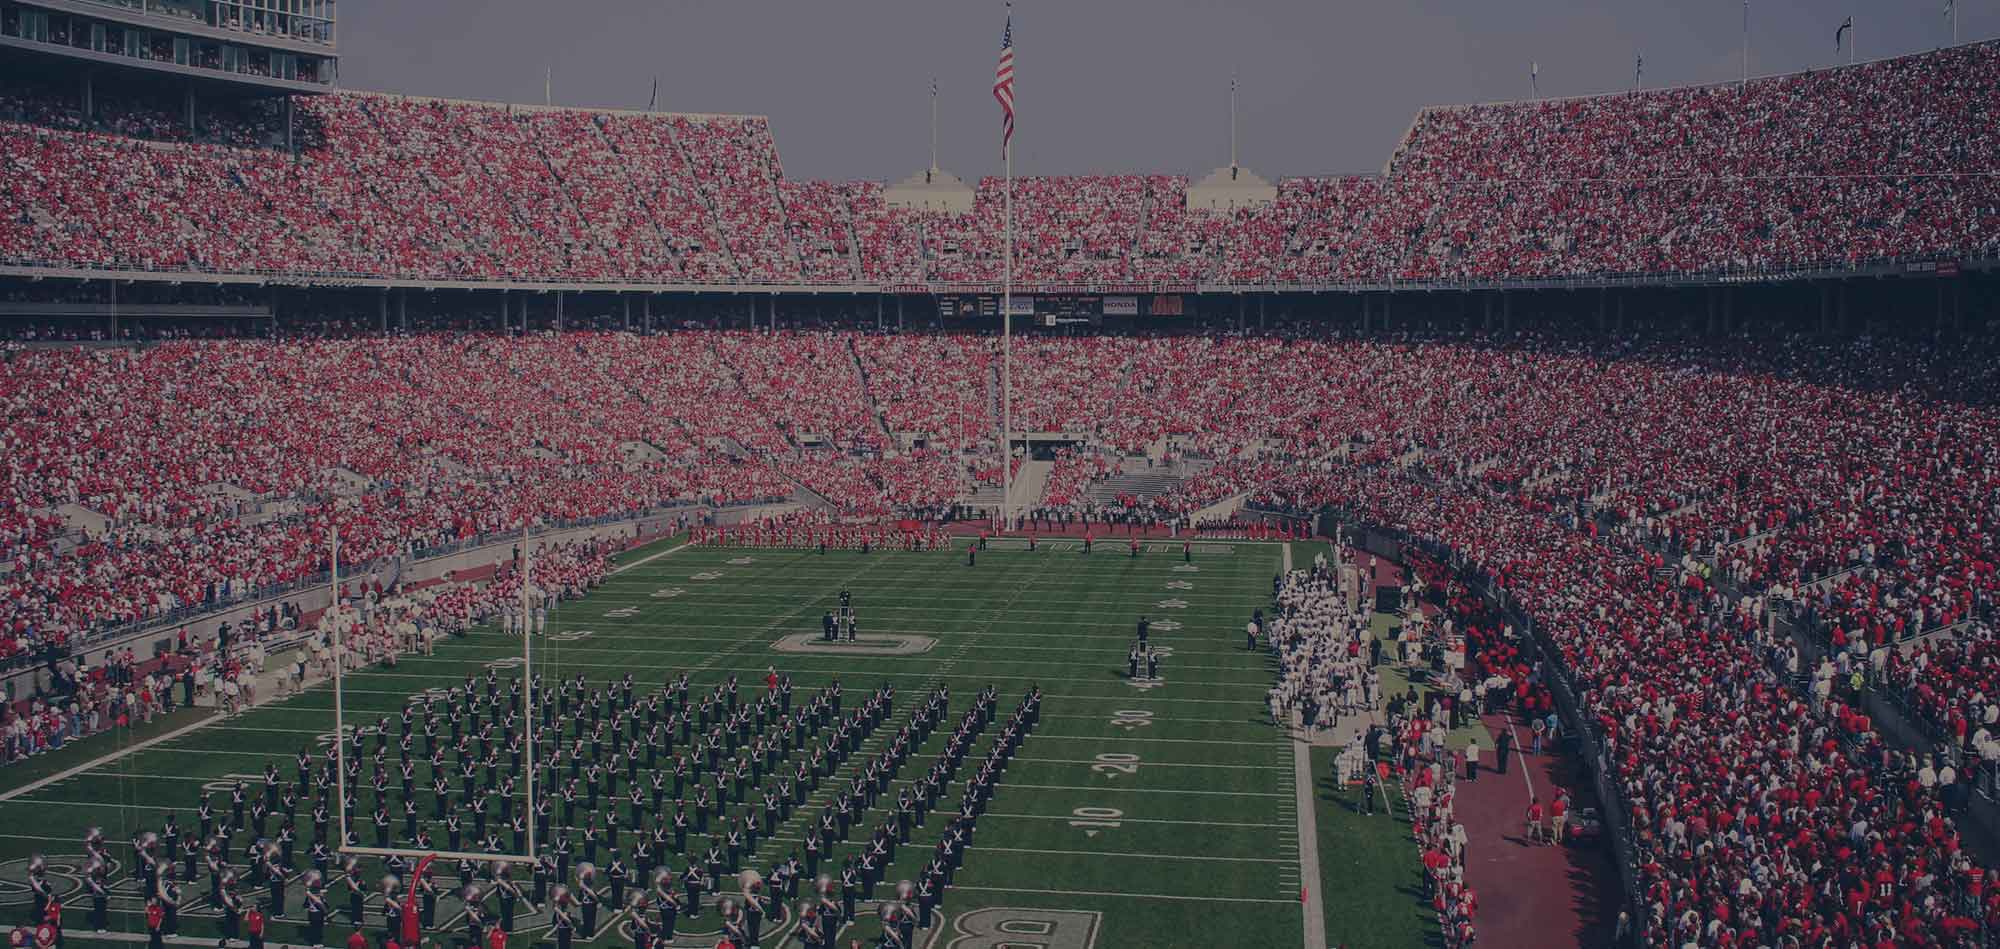 Ohio State University Football Stadium packed with fans on game day